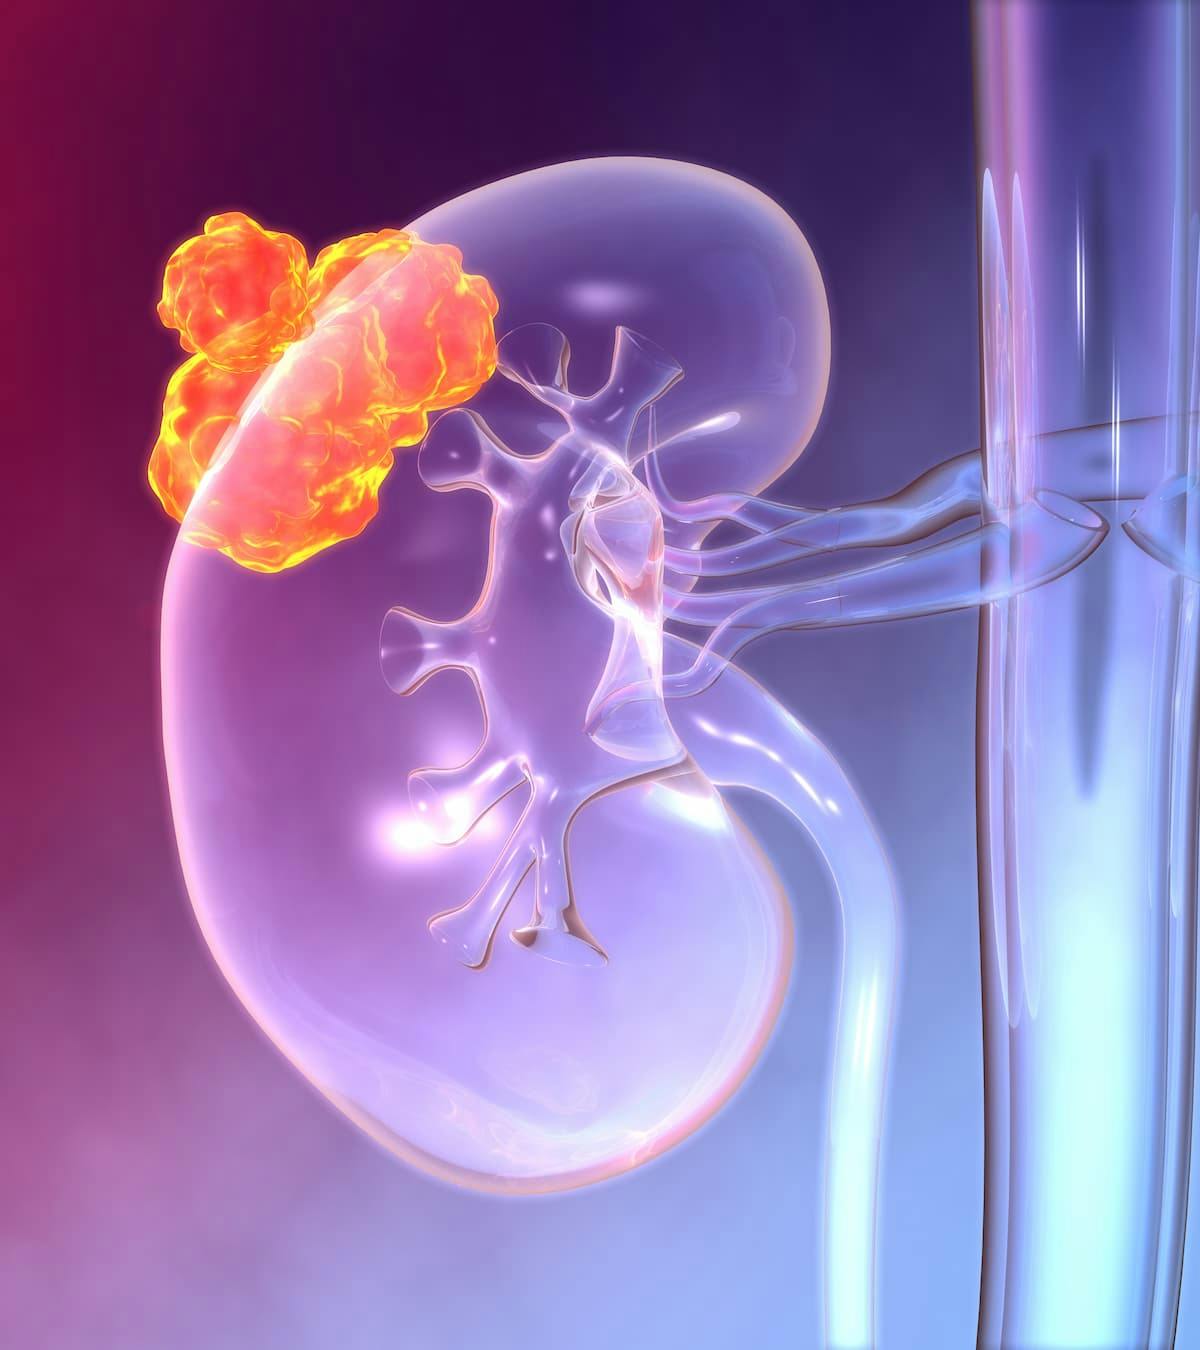 Integrative Modalities Are ‘Extremely Safe’ in Kidney Cancer Care | Image Credit: © Axel Kock - stock.adobe.com.